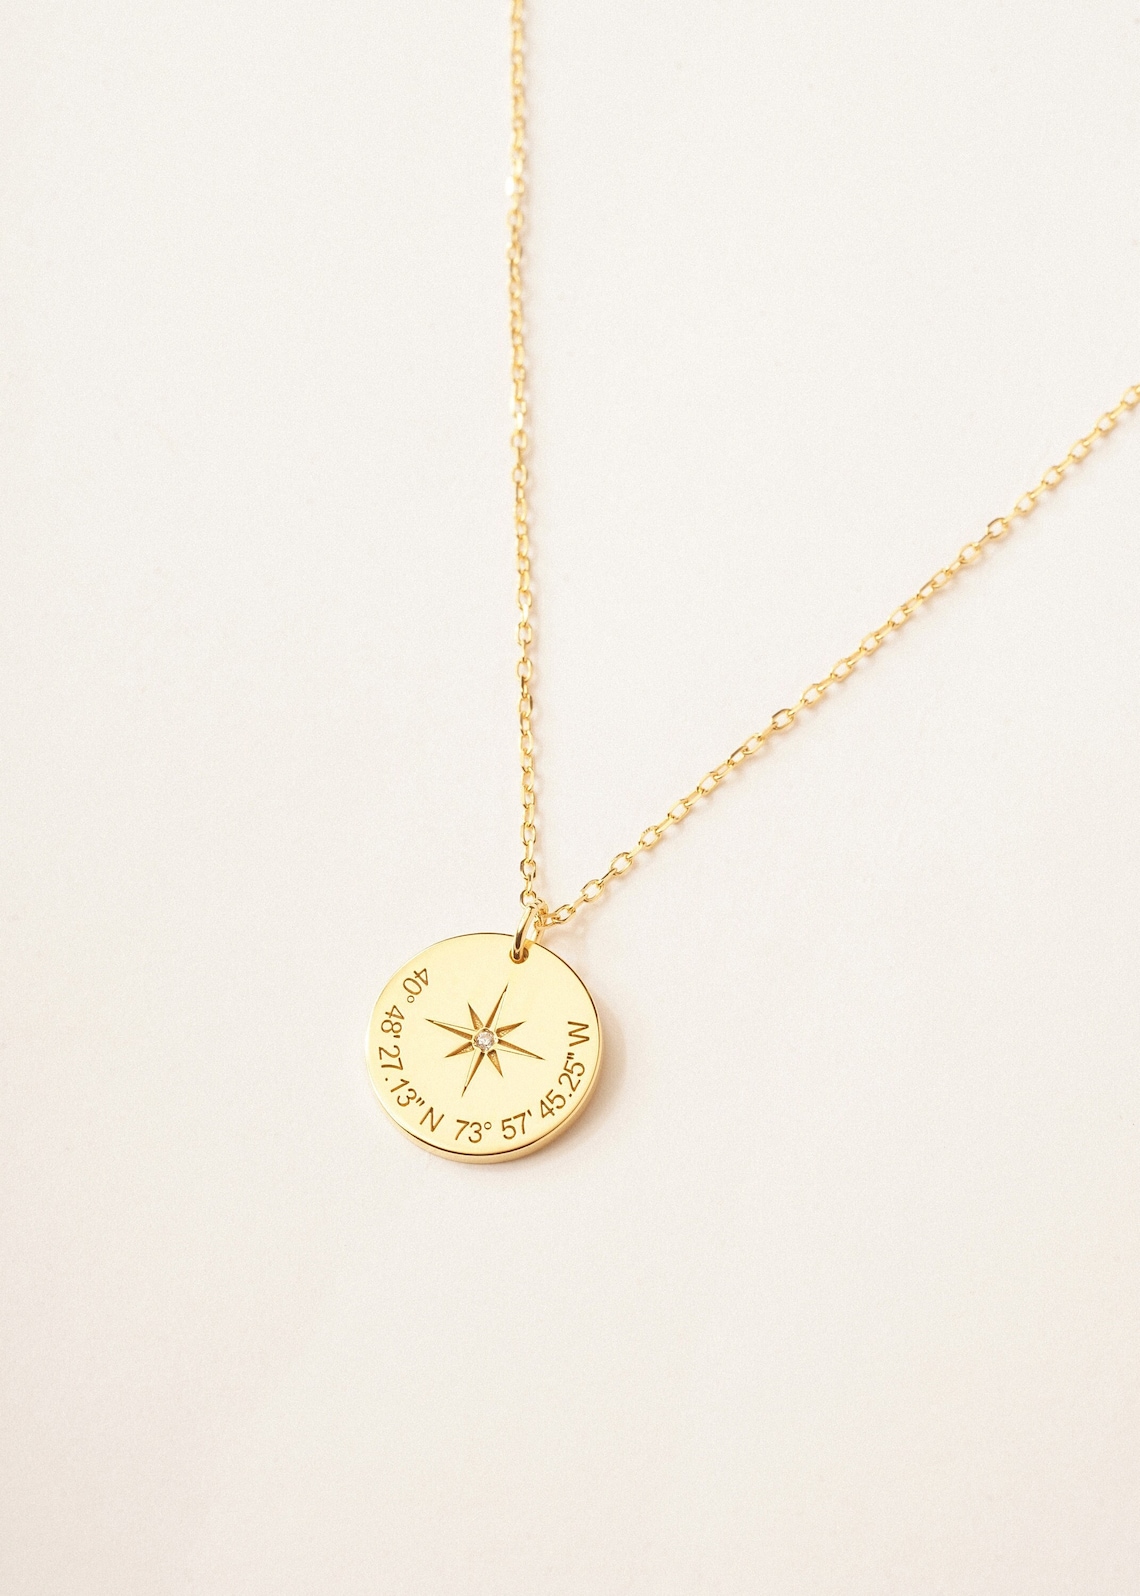 Customized Graduation Gift Personalized Compass Necklace - Etsy